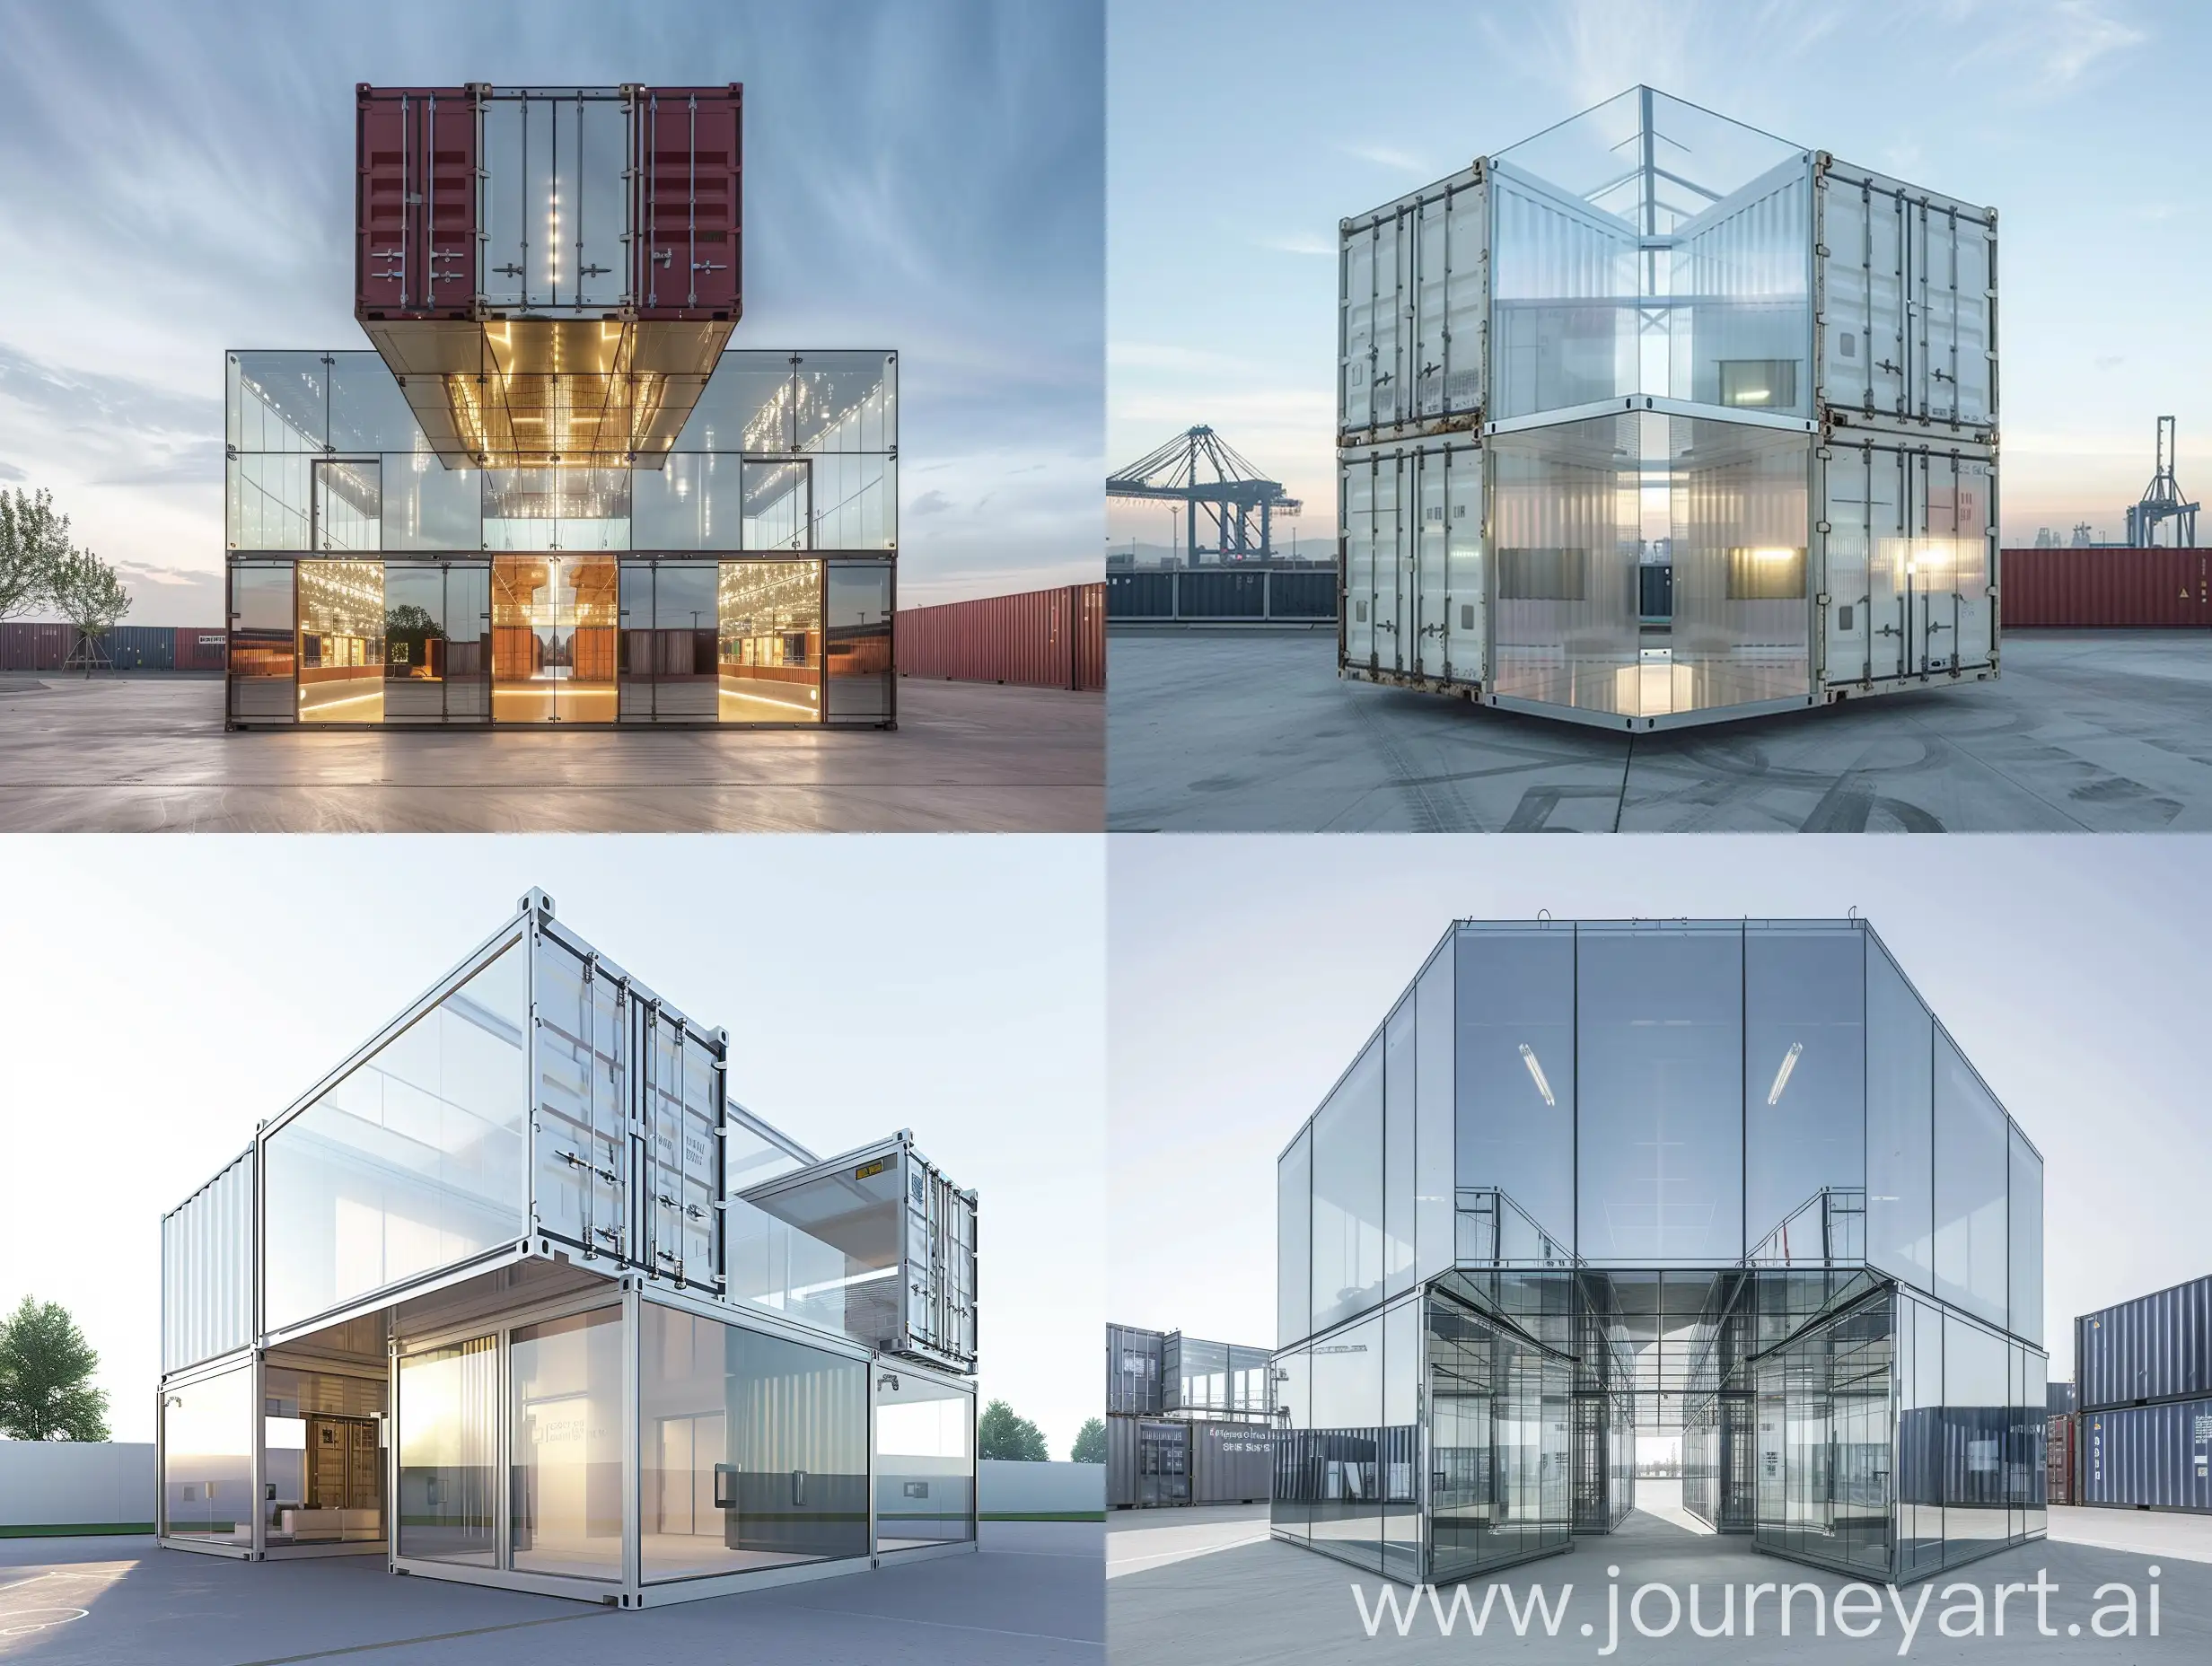 fourteen meter translucent mirrored cube, built around three twelve meter shipping containers, stacked in a staggered fashion, each with glass doors at each end